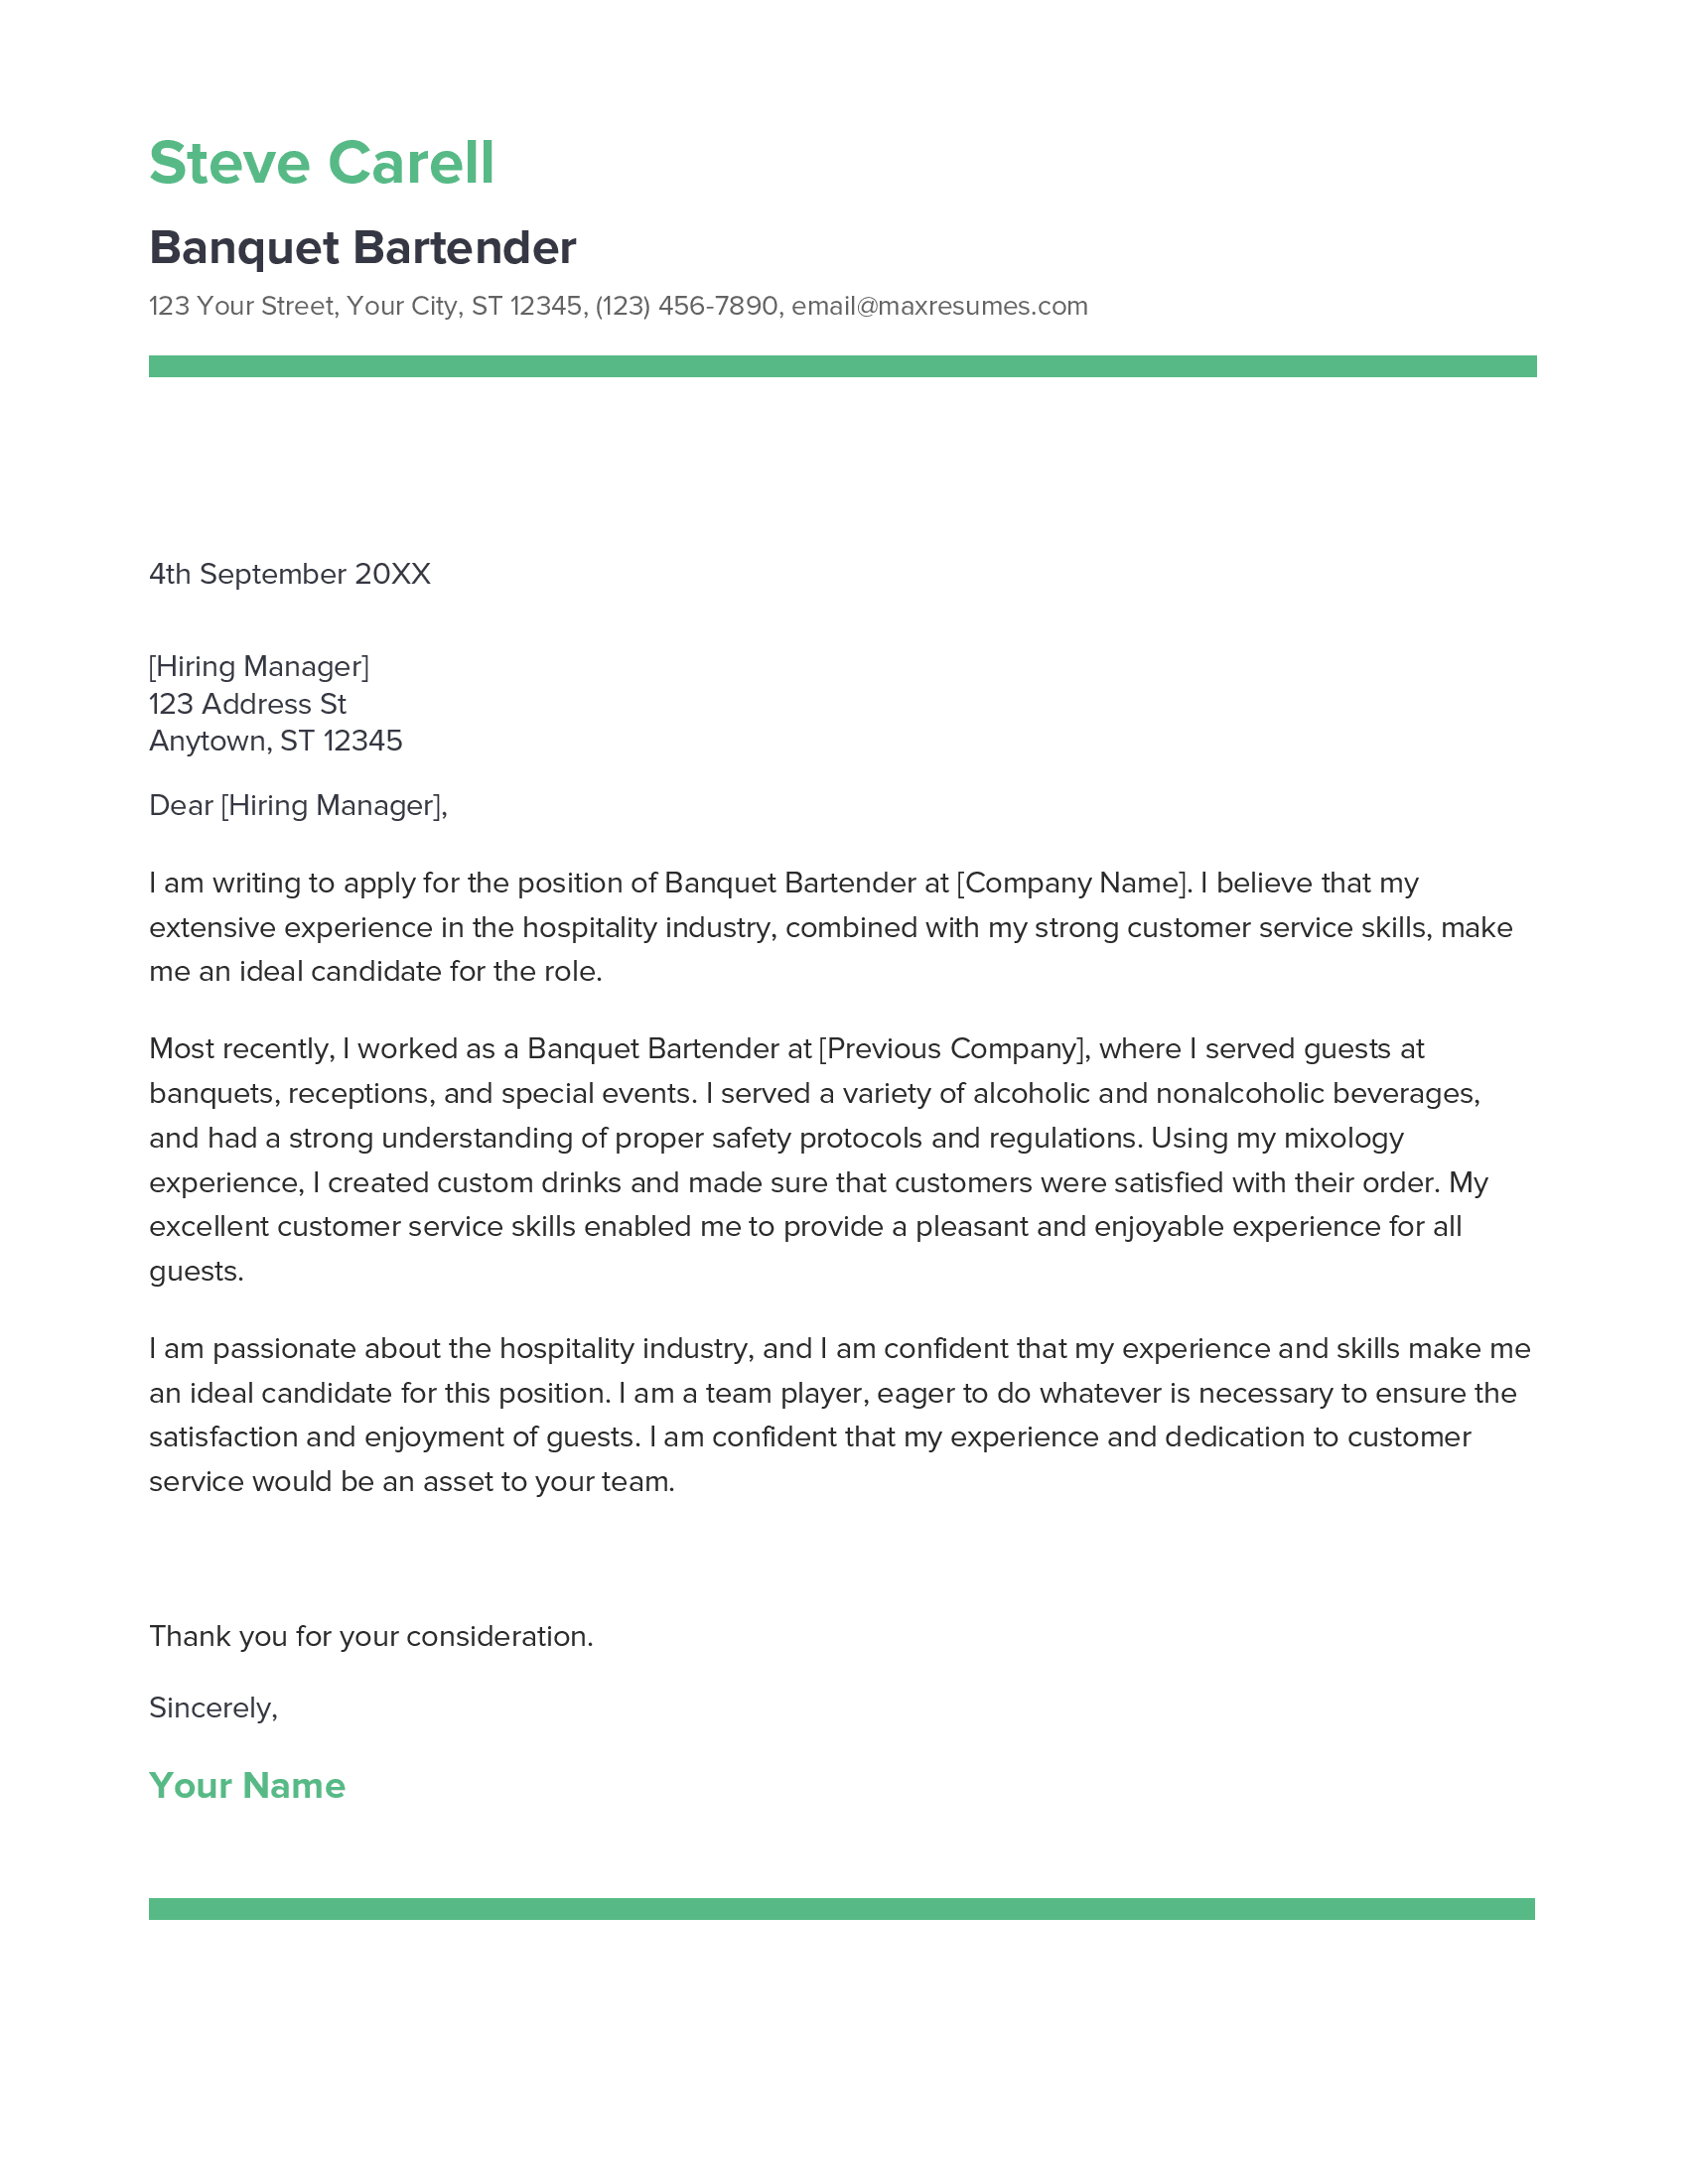 Banquet Bartender Cover Letter Example